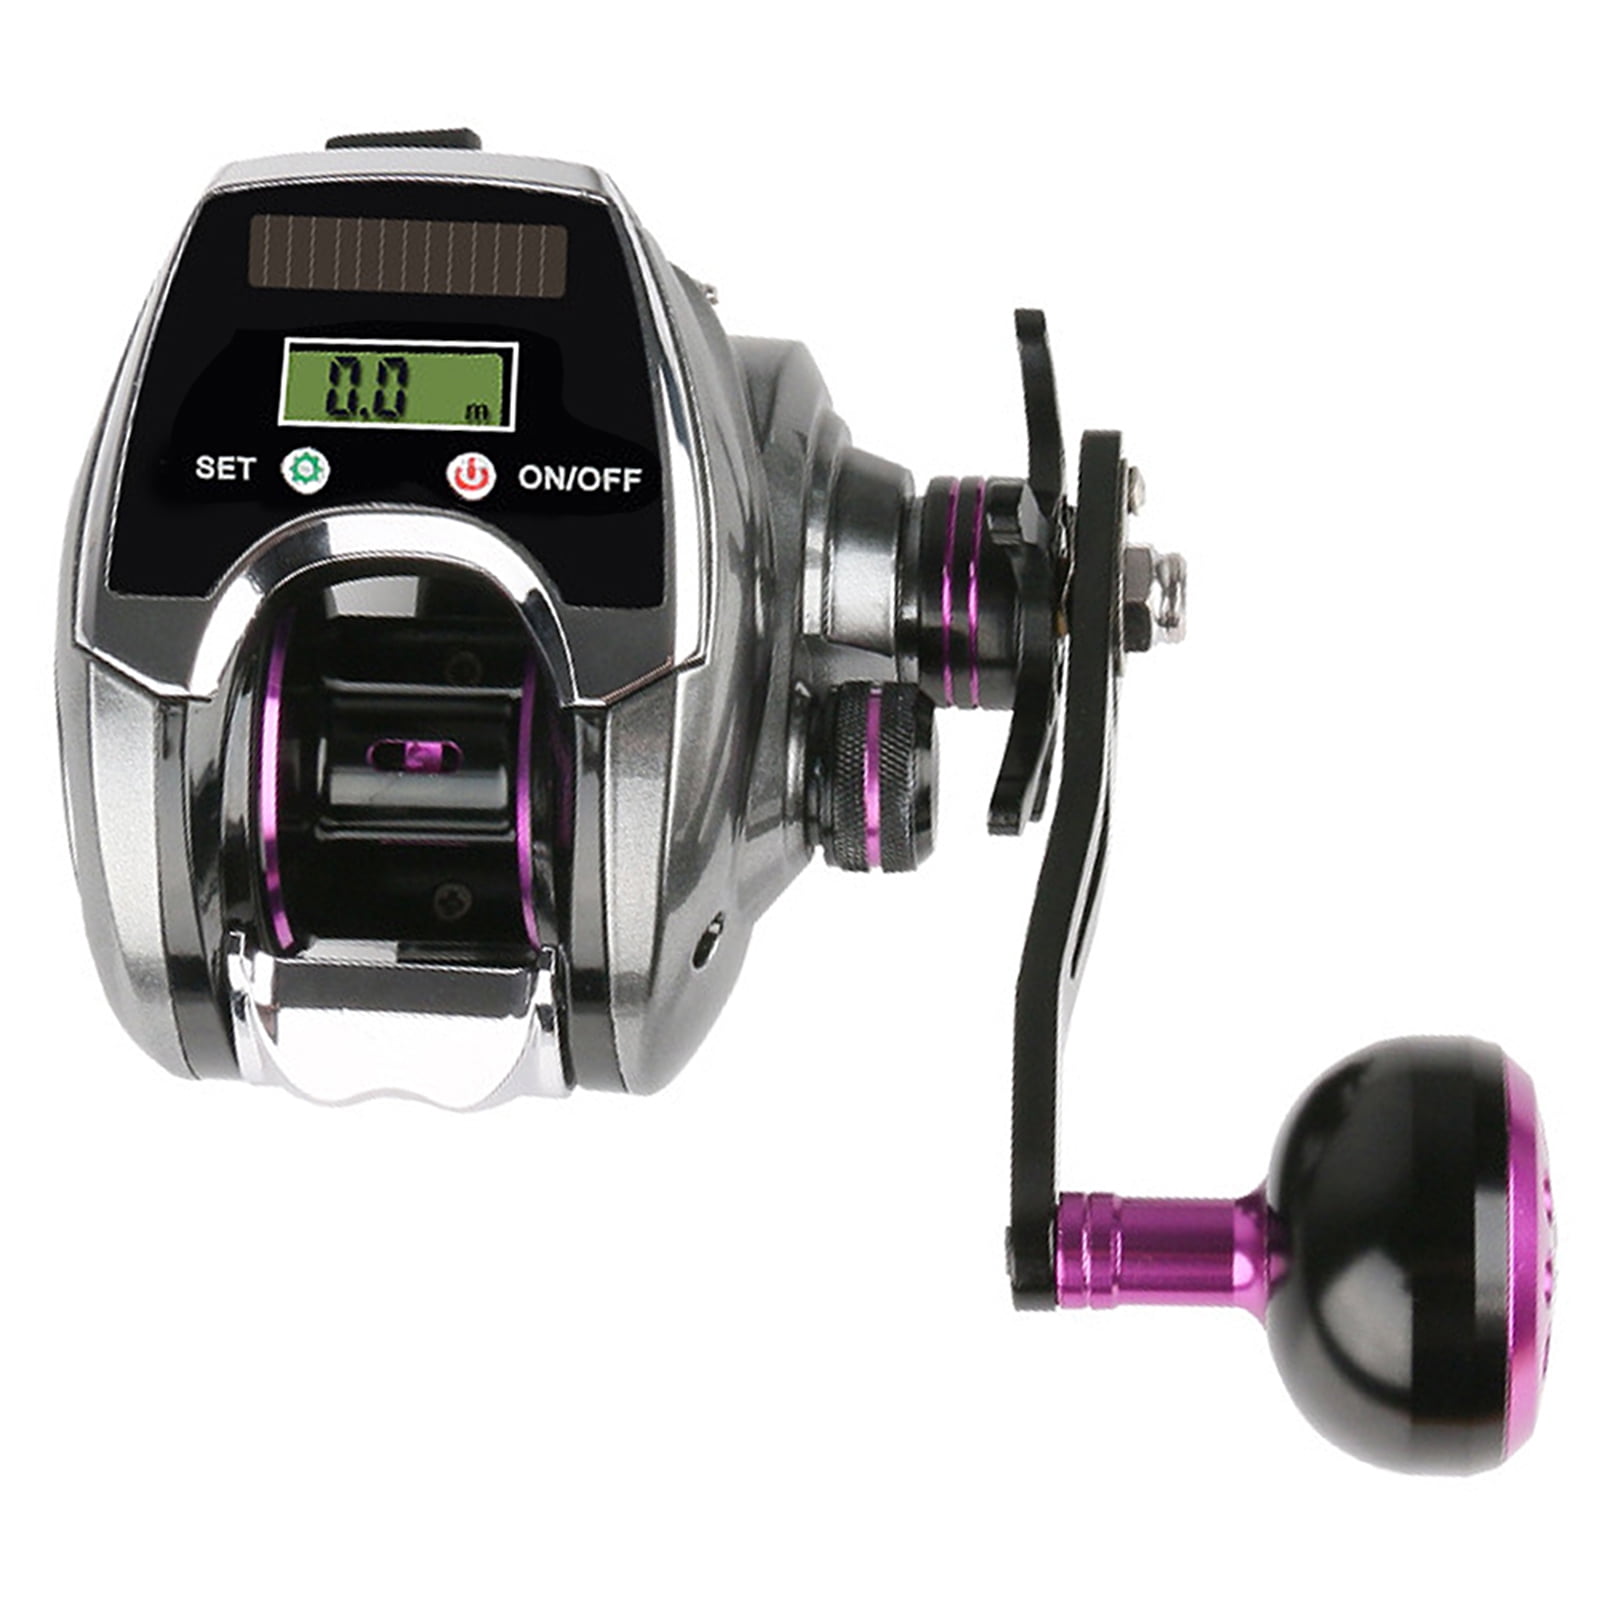 Ametoys 6+1bb 8.0:1 Ratio Digital Display Baitcasting Reel with Sun Power Charging System High Speed Fishing Reel with Line Counter, Size: Right Hand